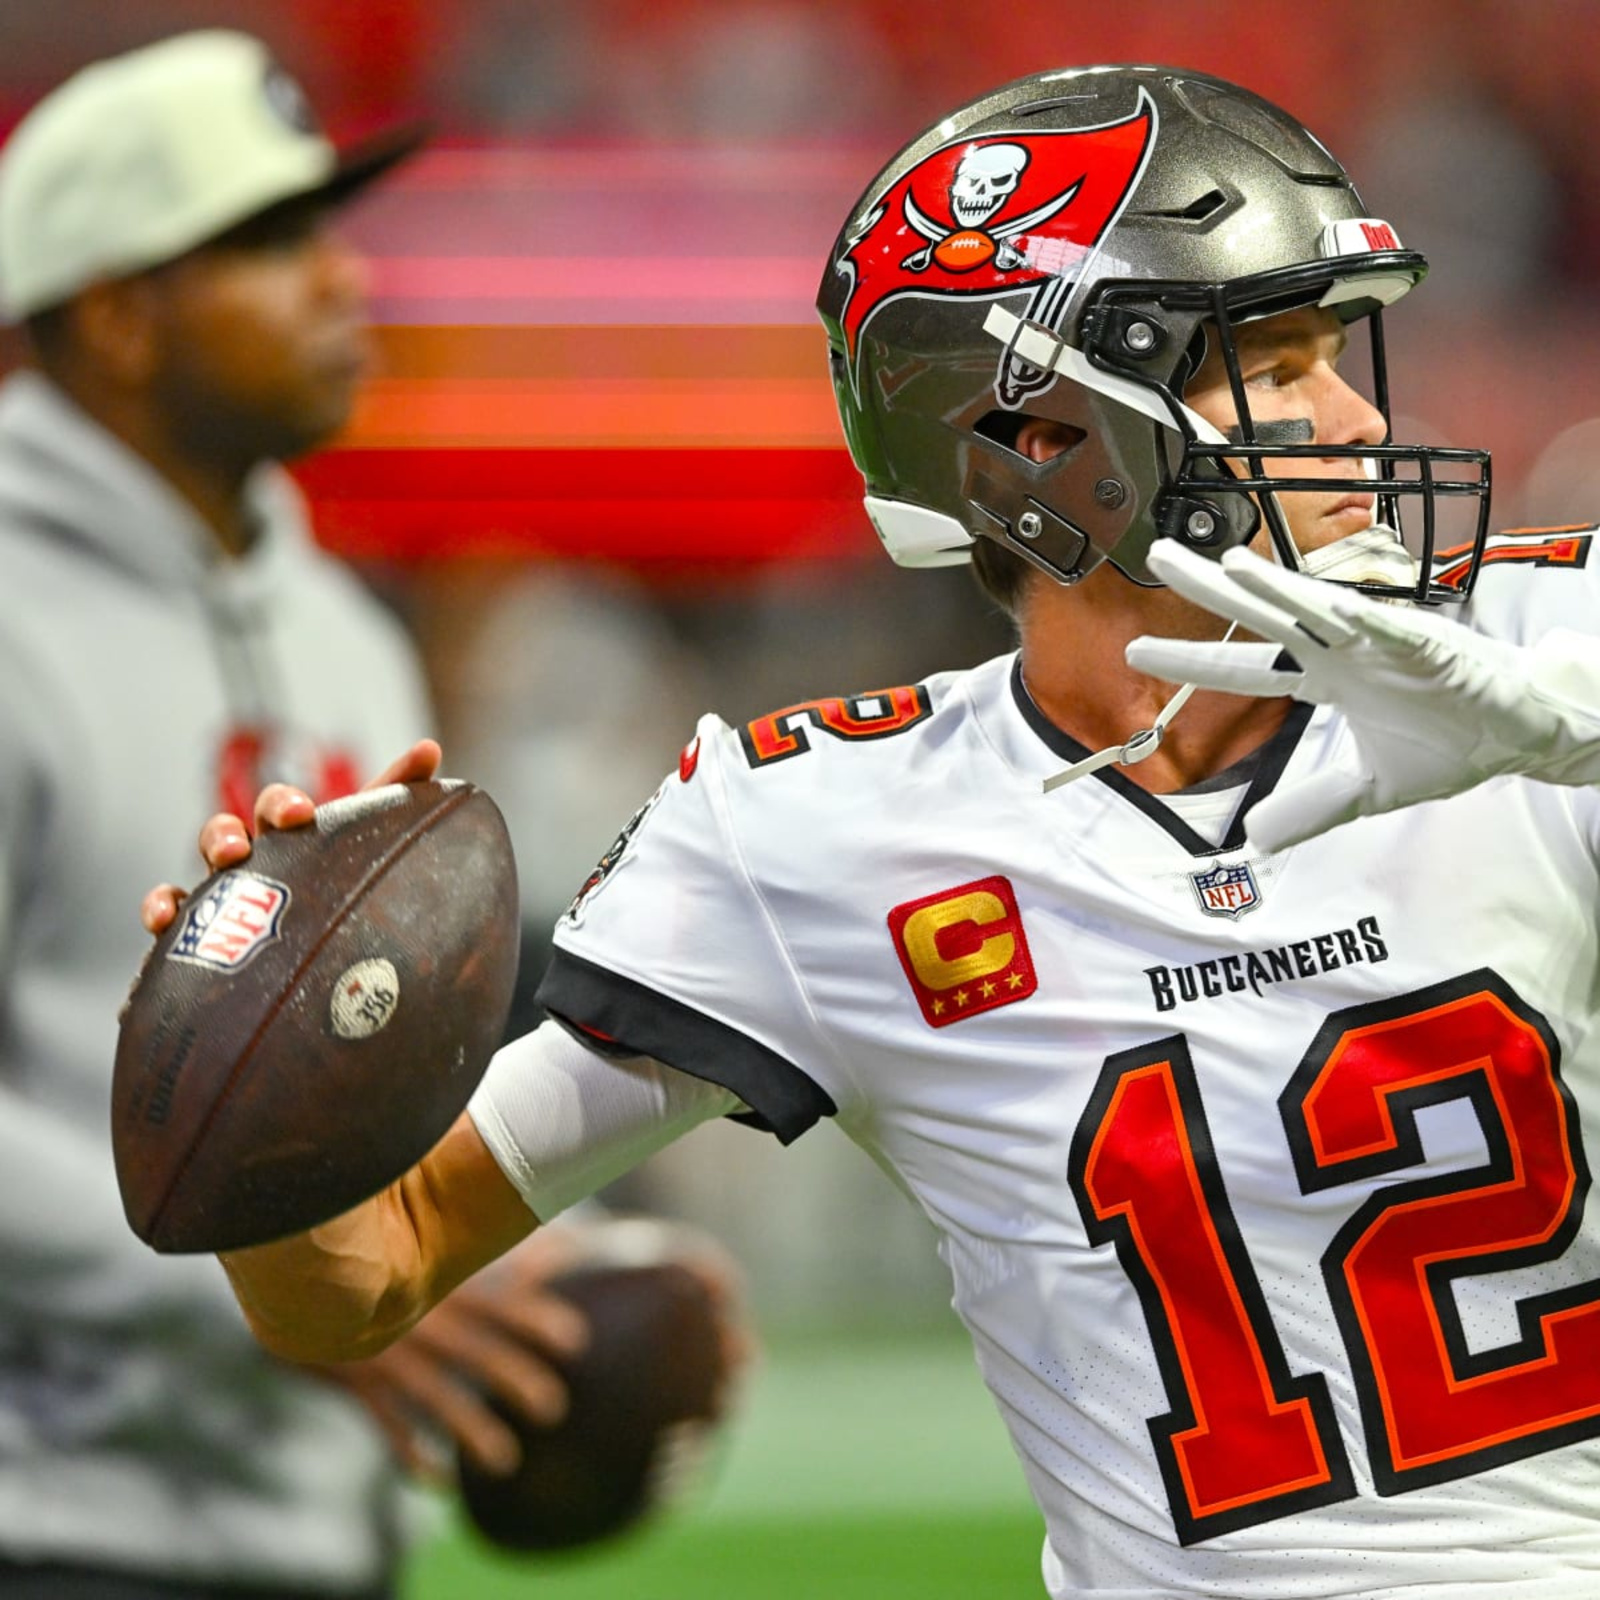 Cowboys-Bucs, NFL DFS picks: Optimize DraftKings Showdown lineup with  captain picks, values - DraftKings Network